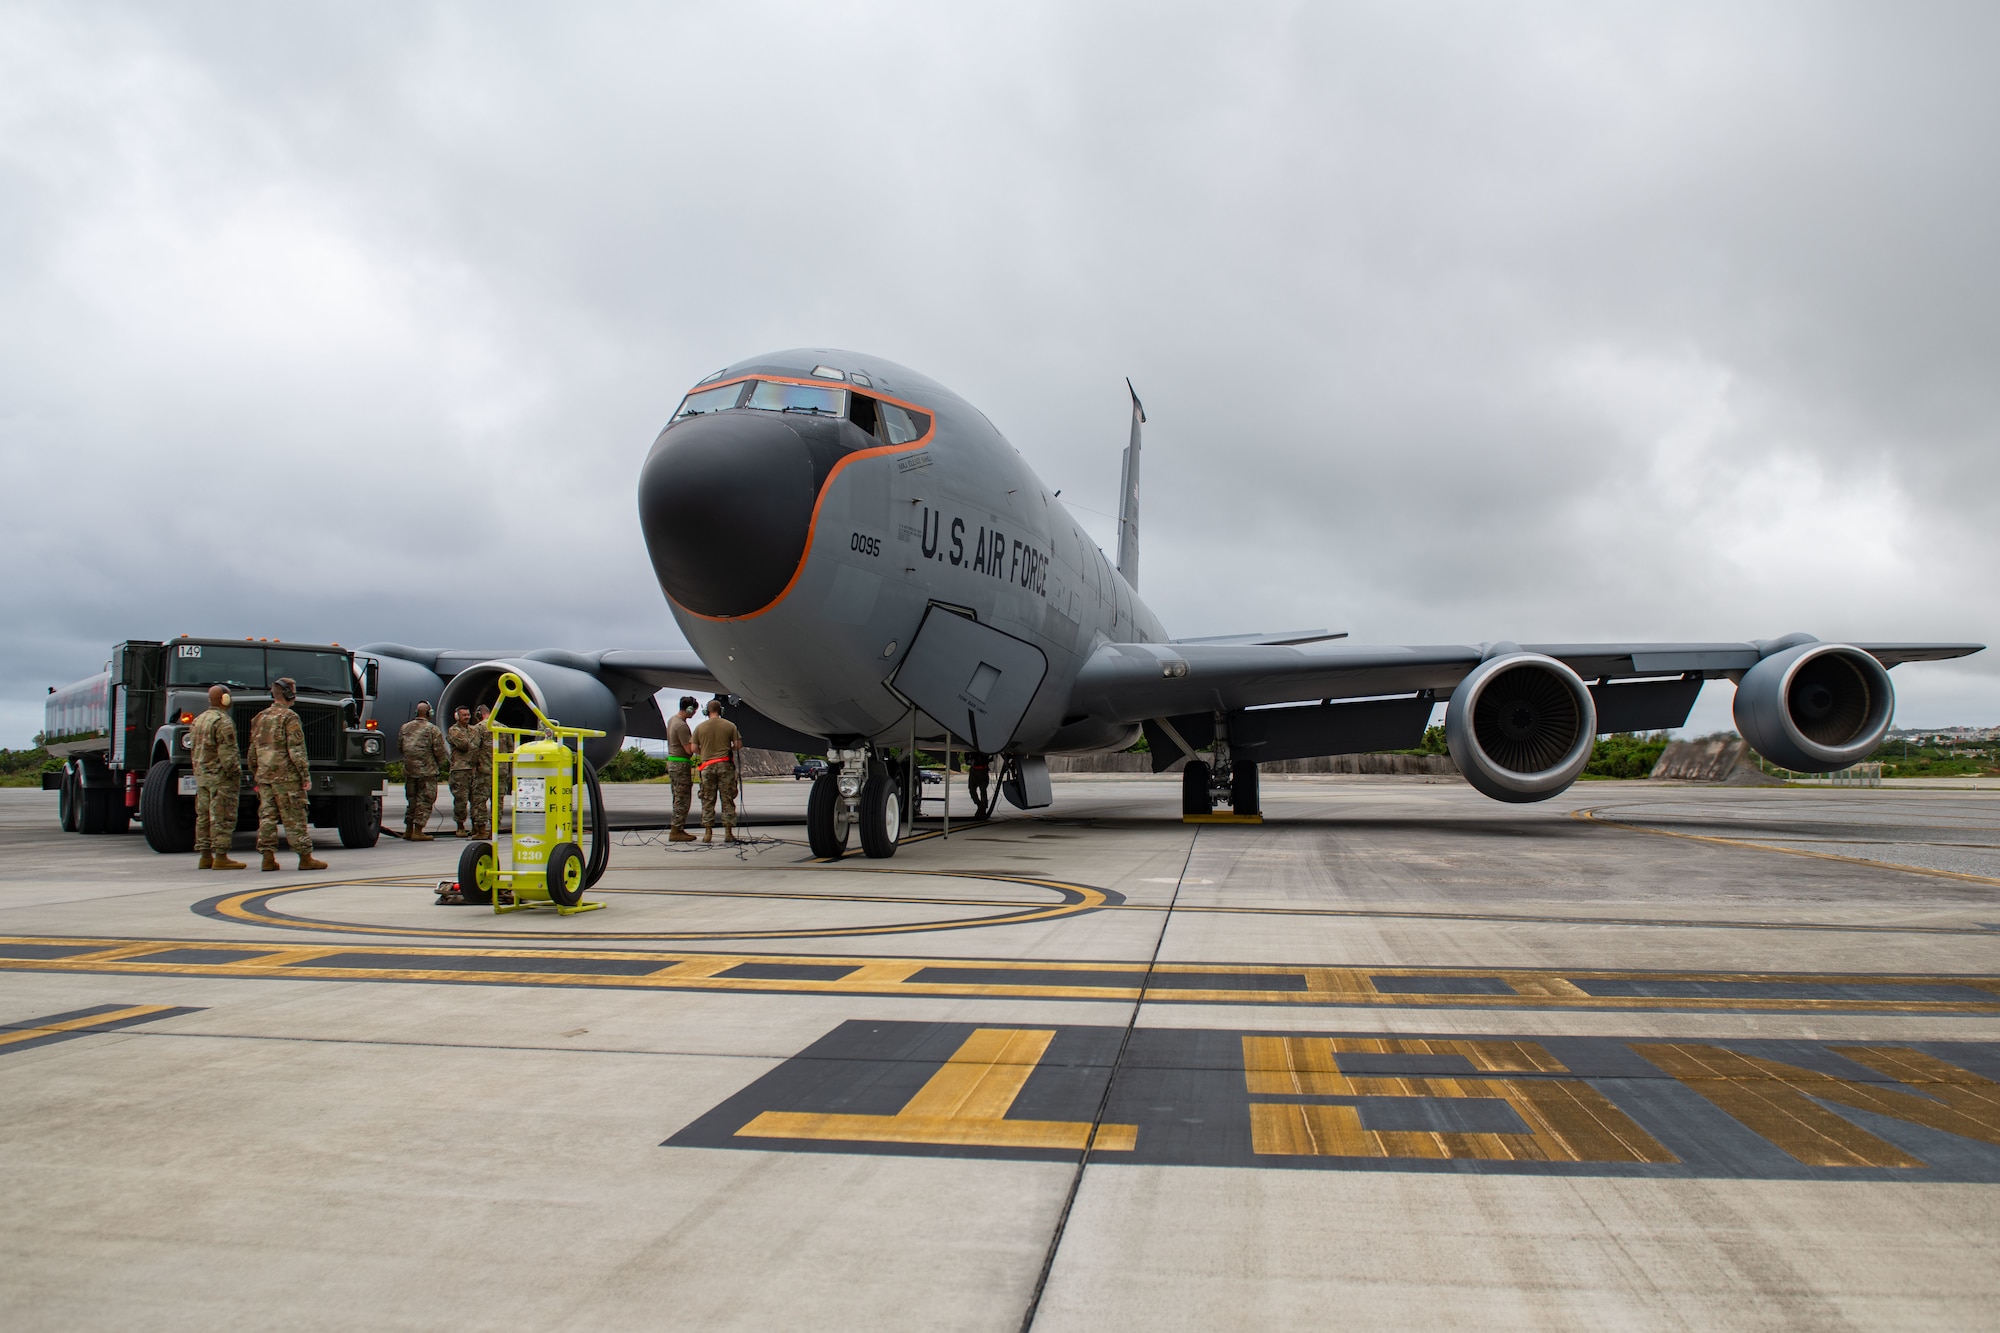 A plane and refueling truck sit side by side as airmen watch the refueling process.